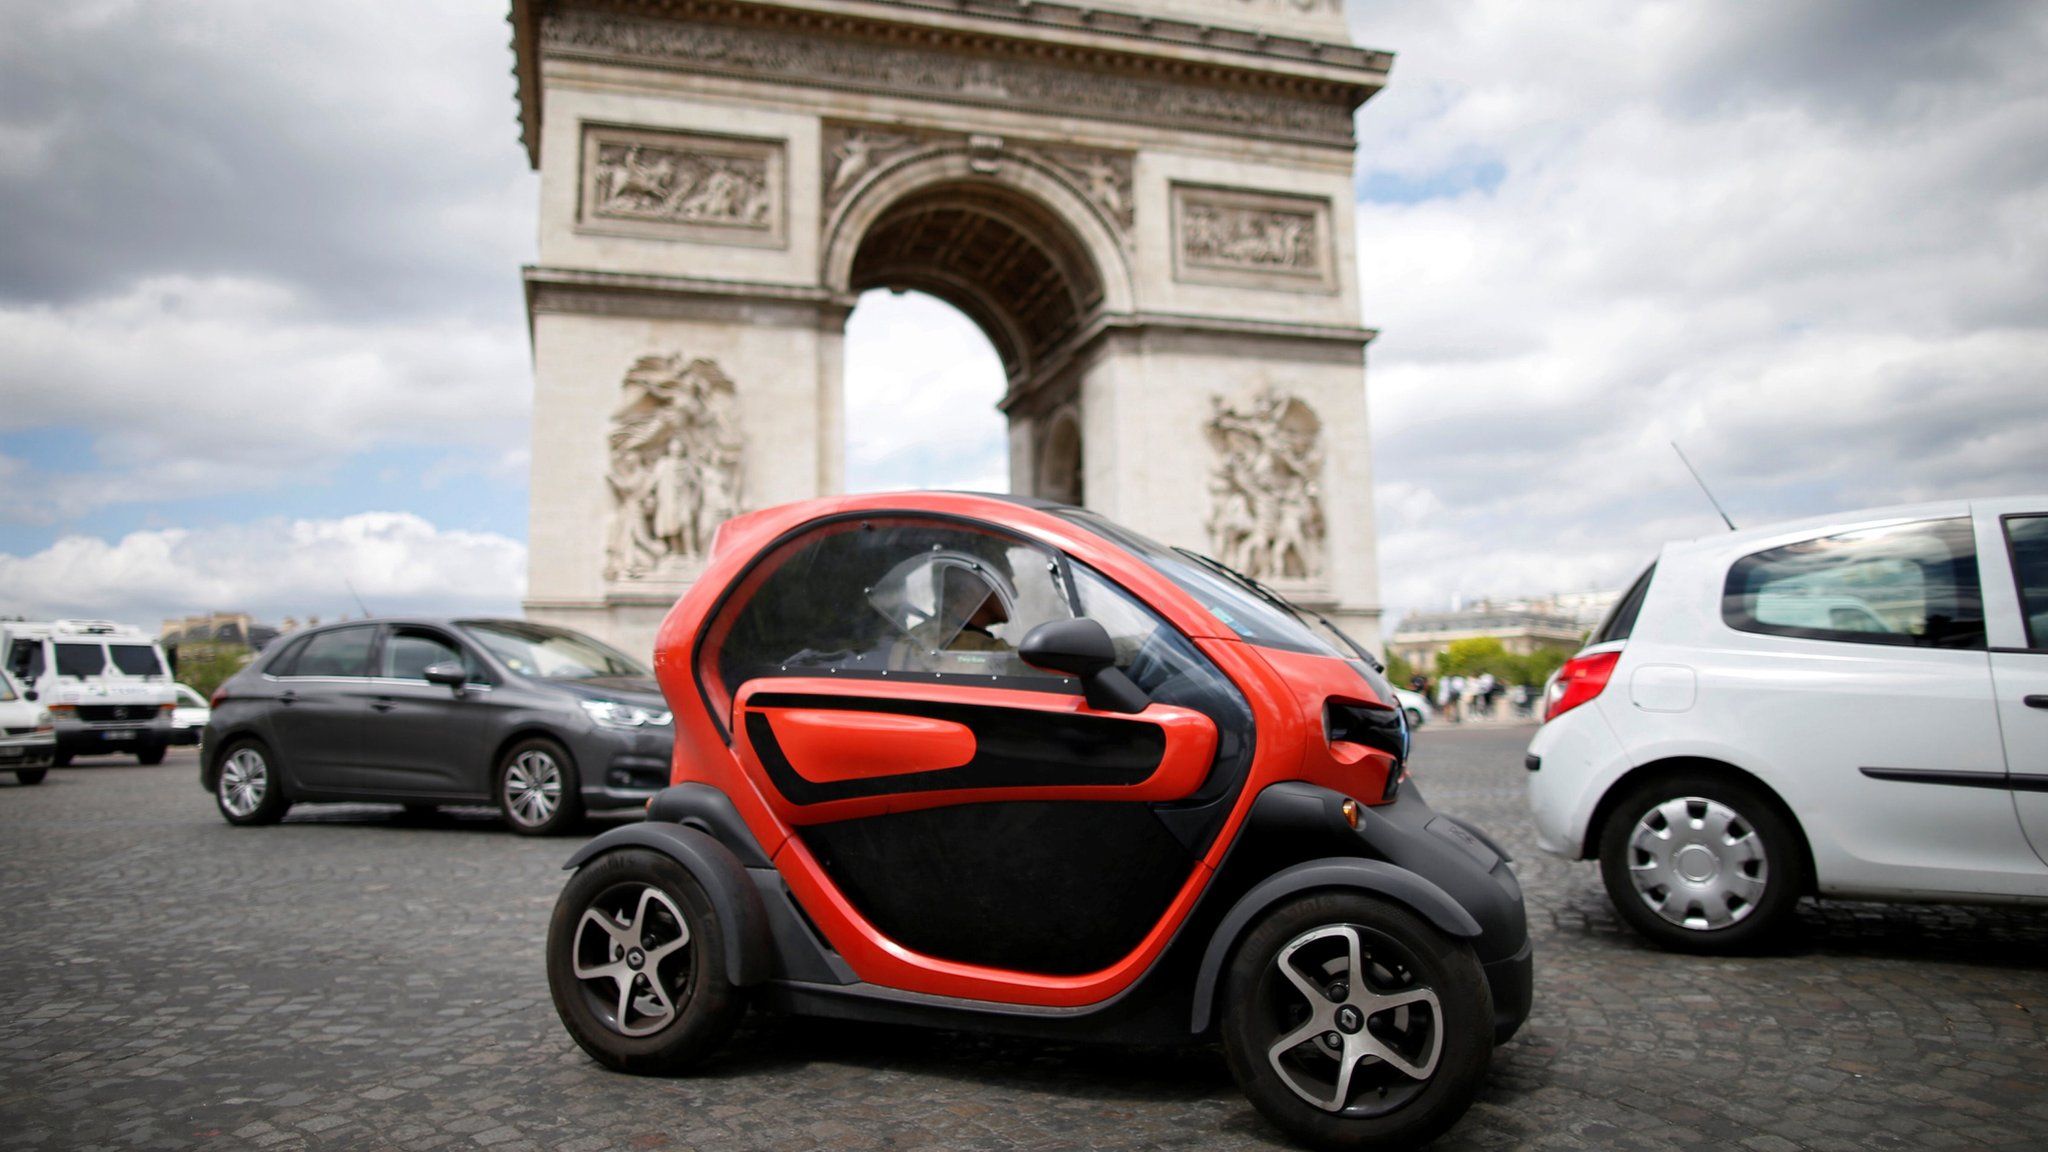 An electric car from Renault, drives past the Arc de Triomphe in Paris on 30 May 2017